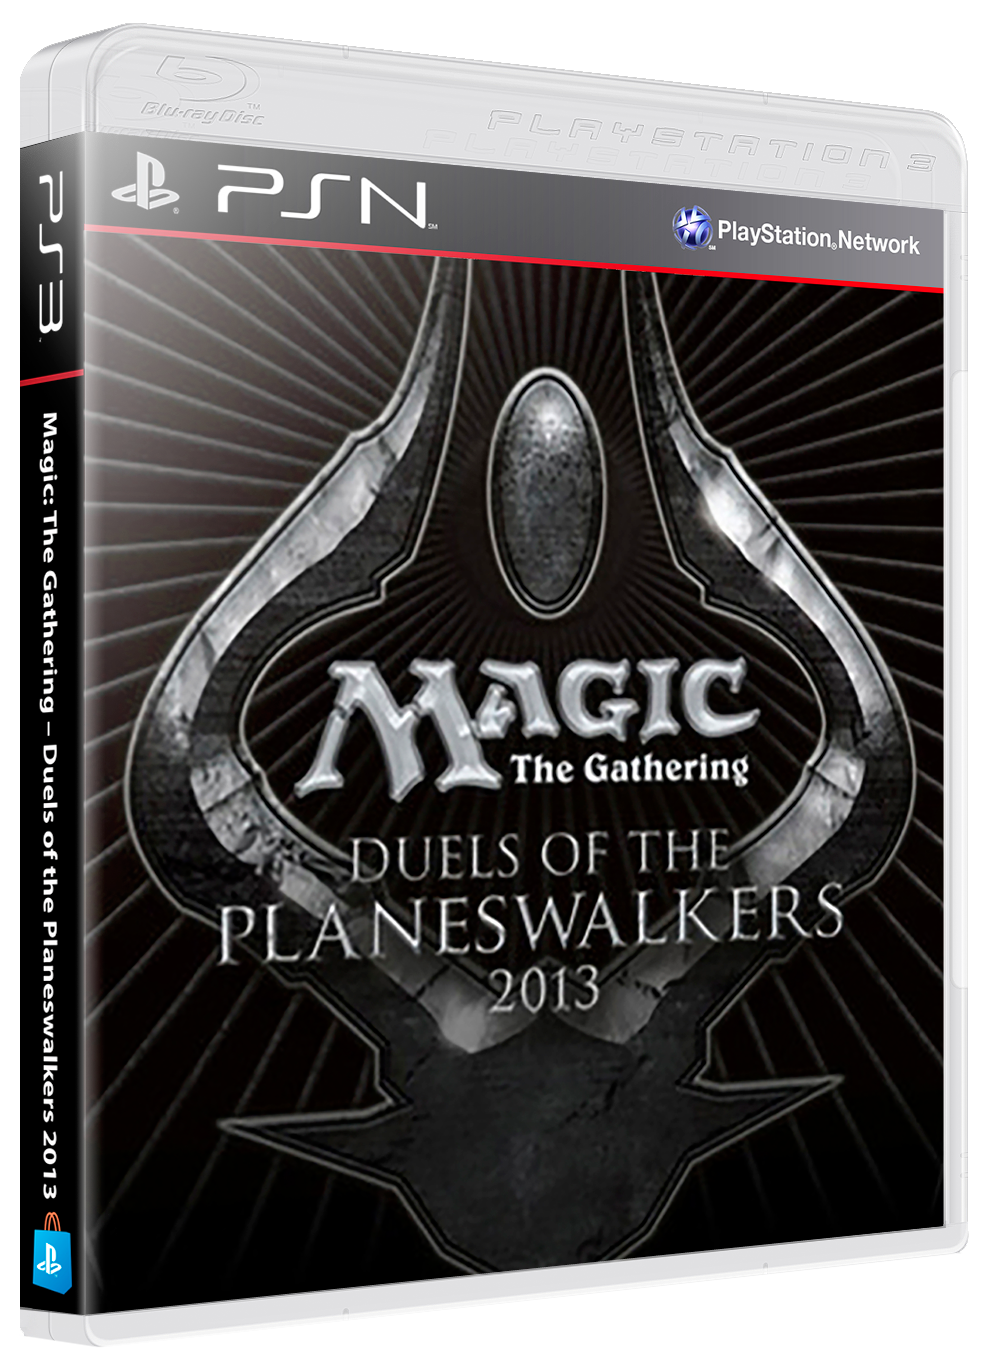 Magic: The Gathering: Duels of the Planeswalkers 2013 Images ...